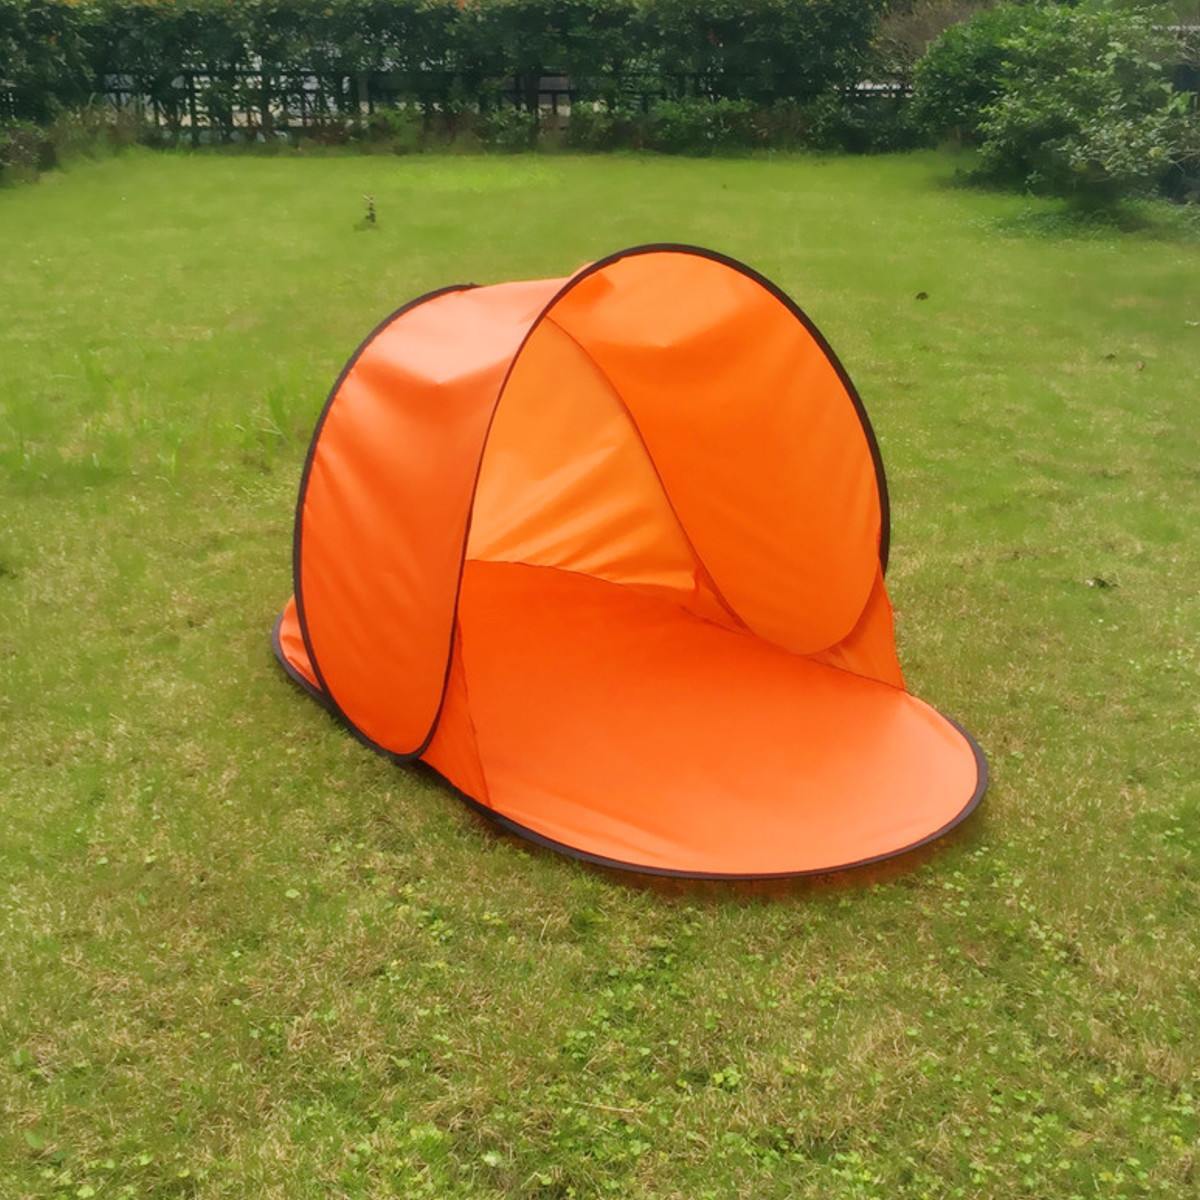 Portable Outdoor Waterproof Camping Beach Picnic Tent Pop Up Open Camping Tent Fishing Hiking Automatic Instant Orange